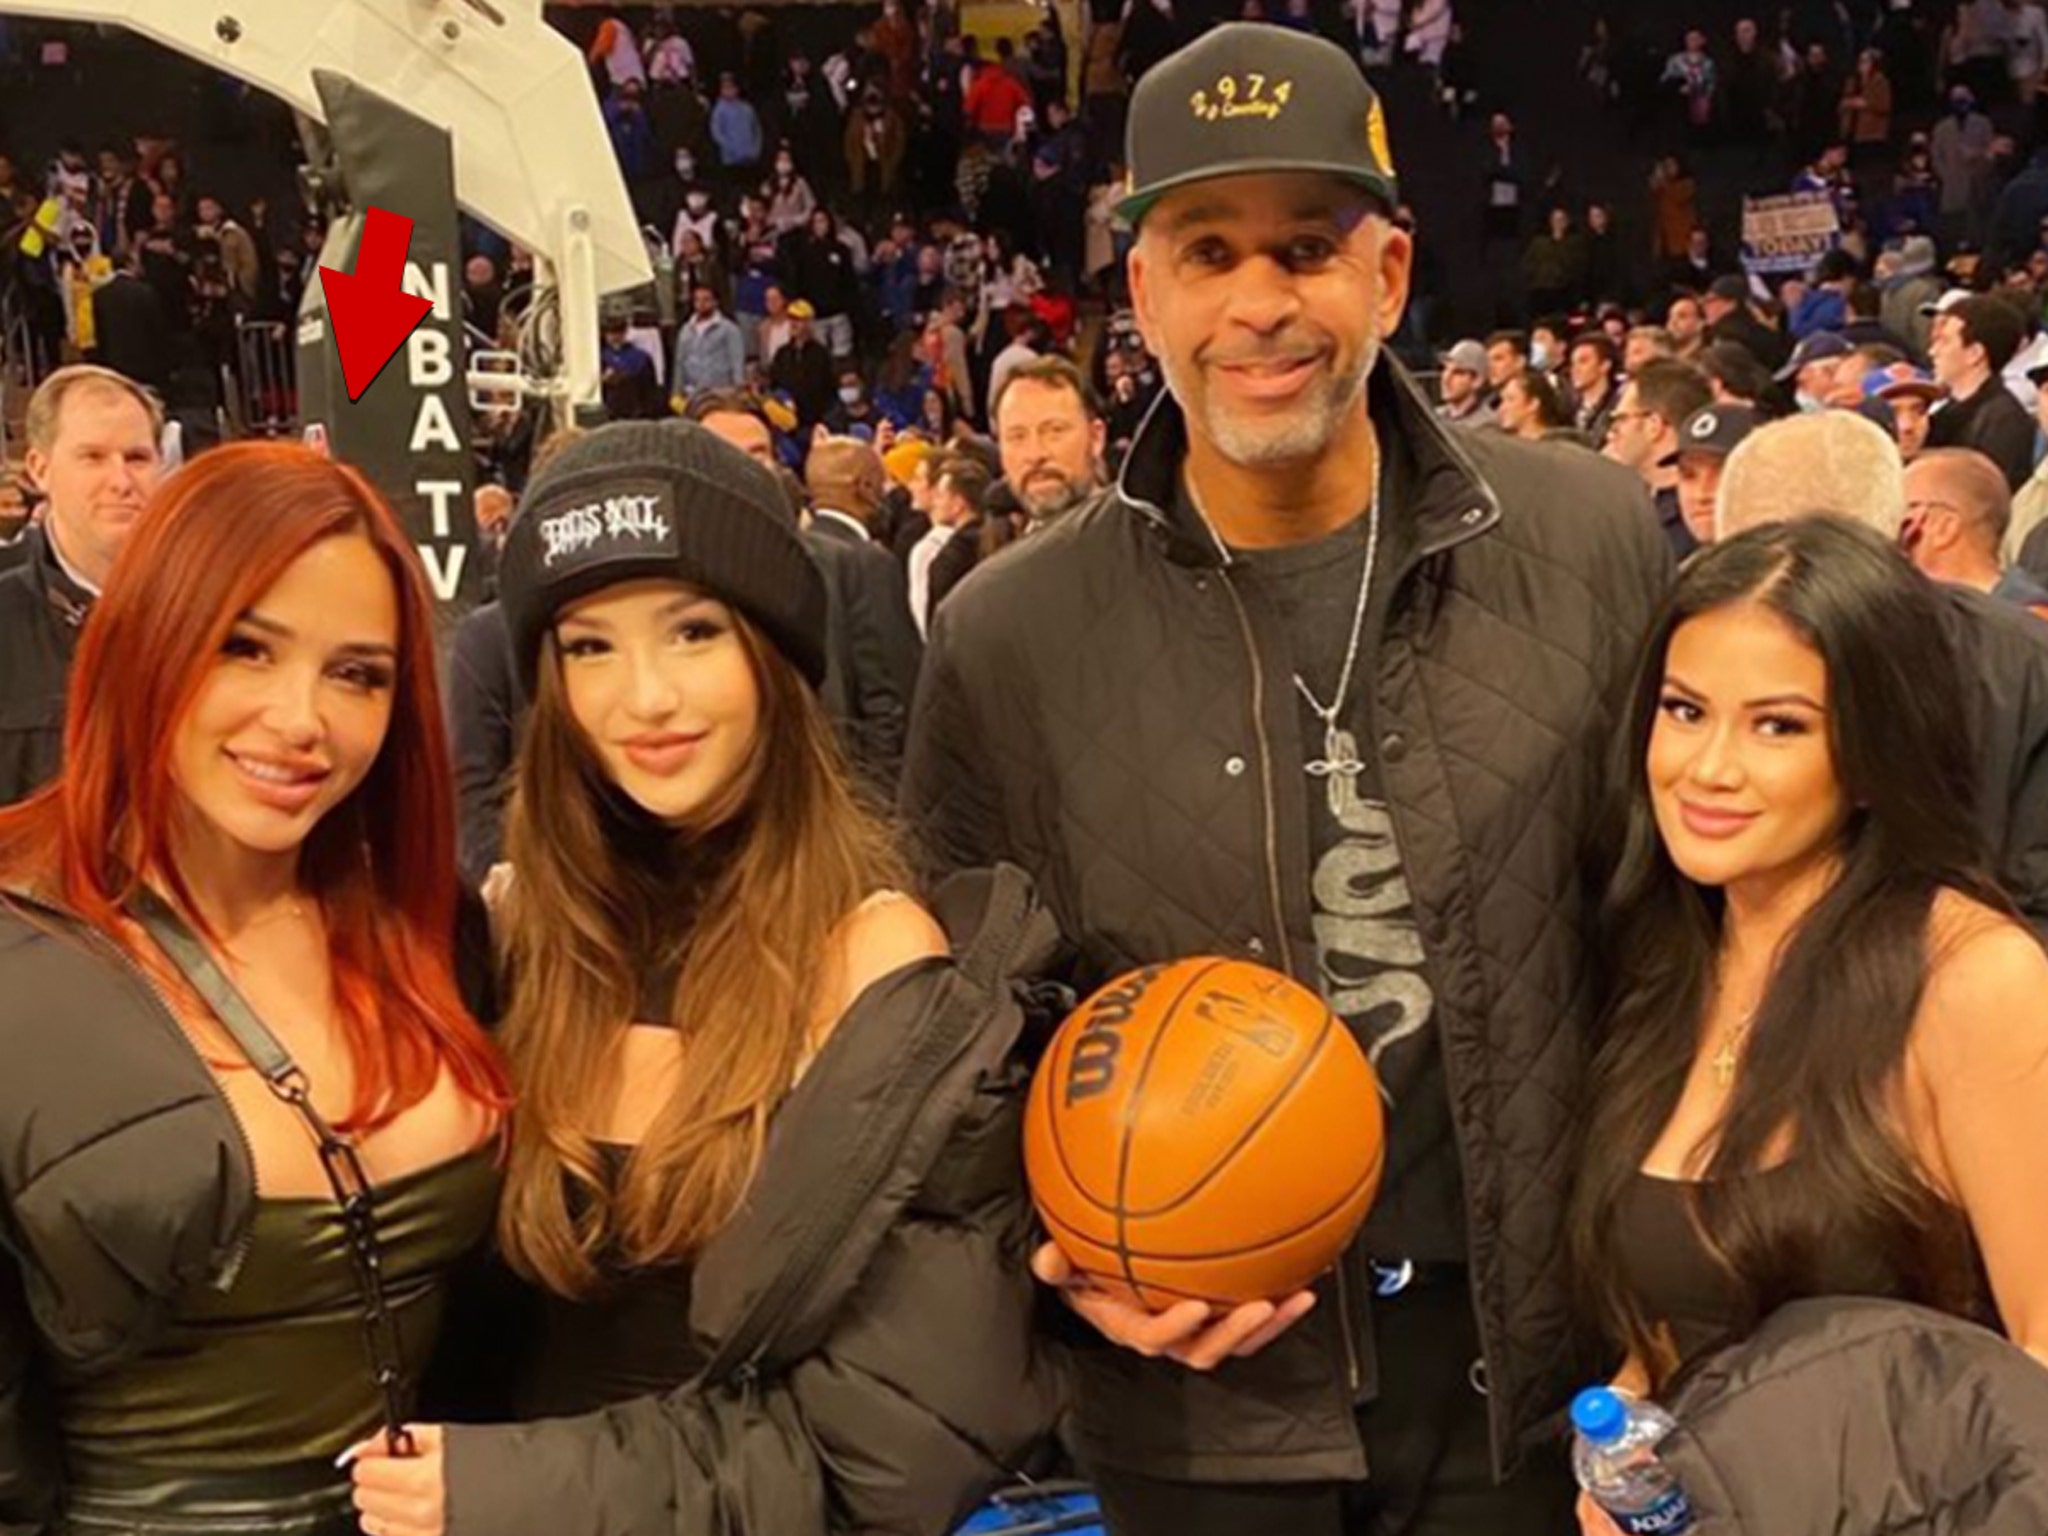 Dell Curry Flirty With Playmate Ana Cheri At Steph's Game, Model Says